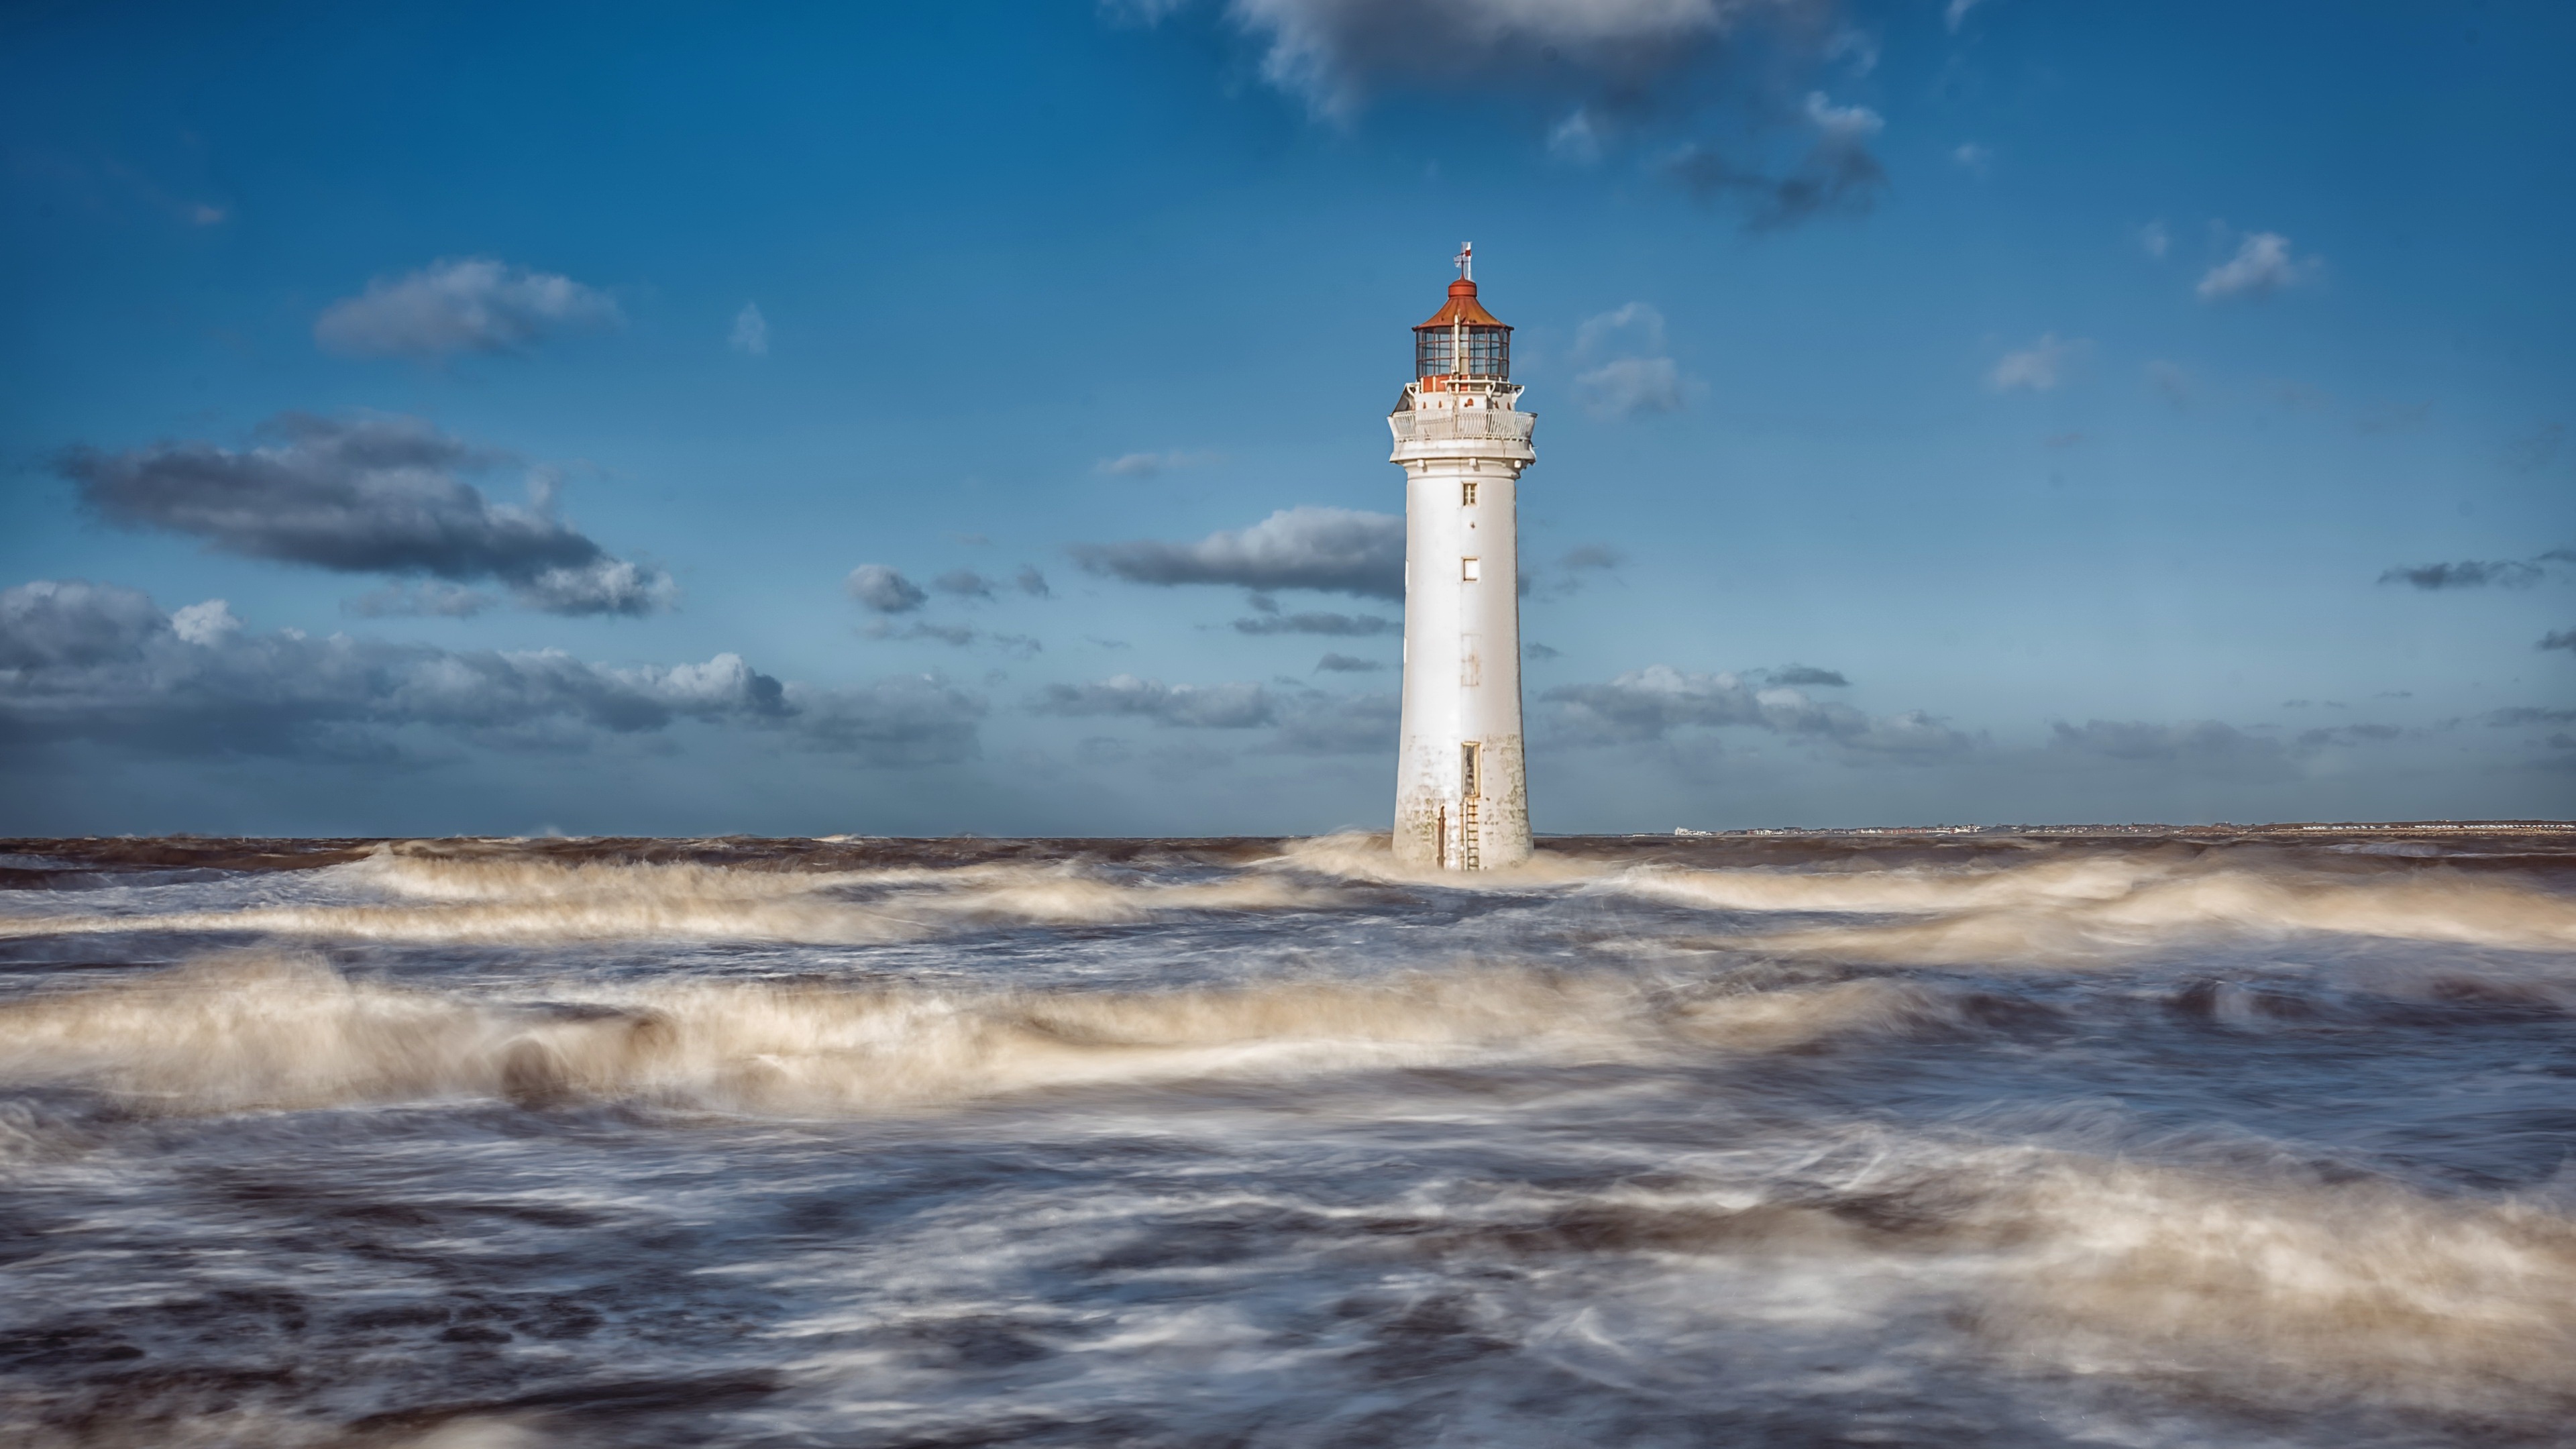 General 3840x2160 sea water coast nature outdoors sky lighthouse